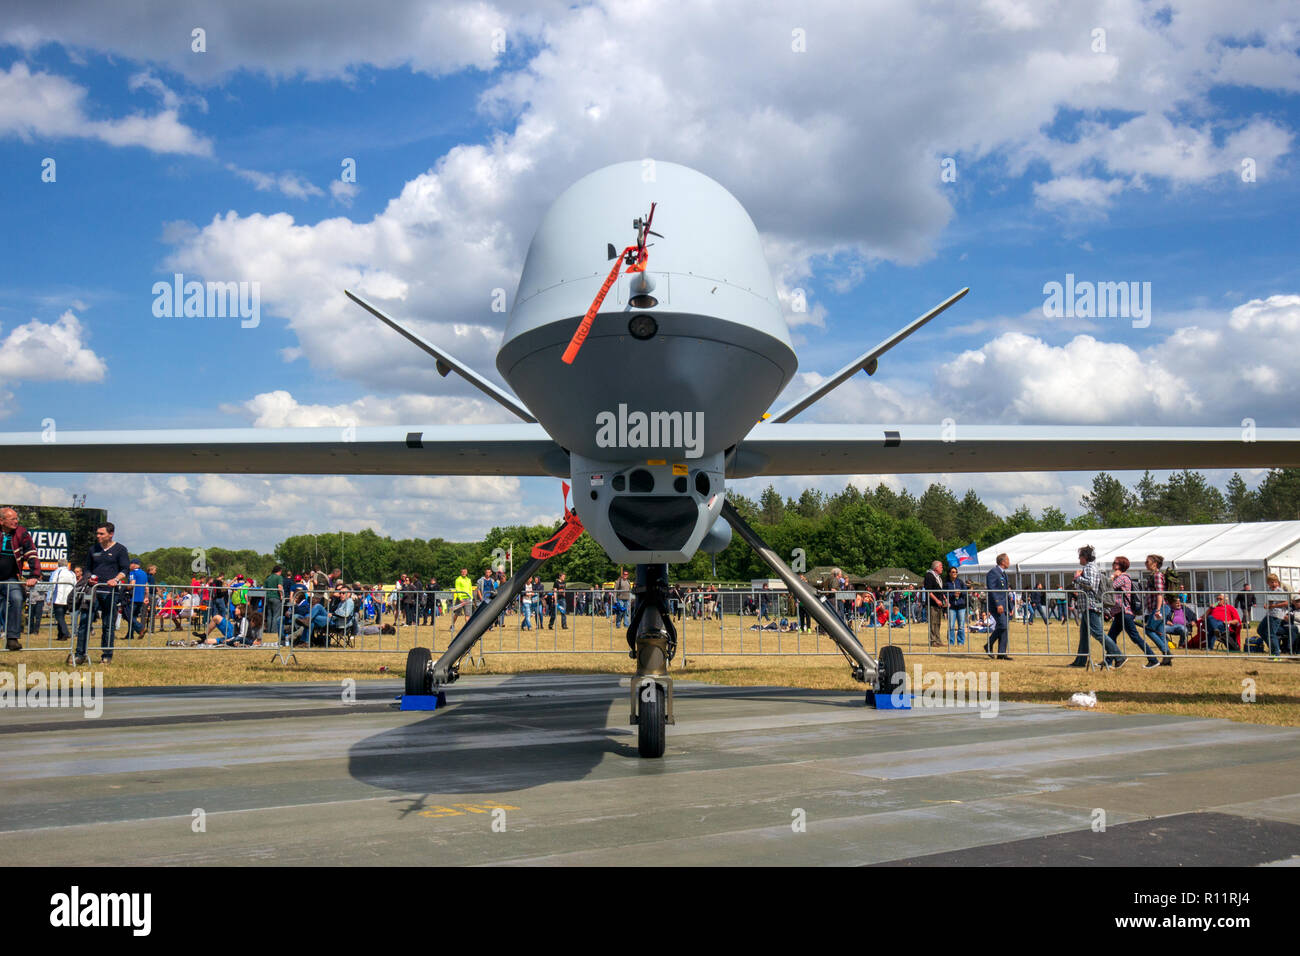 VOLKEL, NETHERLANDS - JUN 15, 2013: Military General Atomics MQ-1 Predator UAV drone on display at the Royal Netherlands Air Force Open Day. Stock Photo